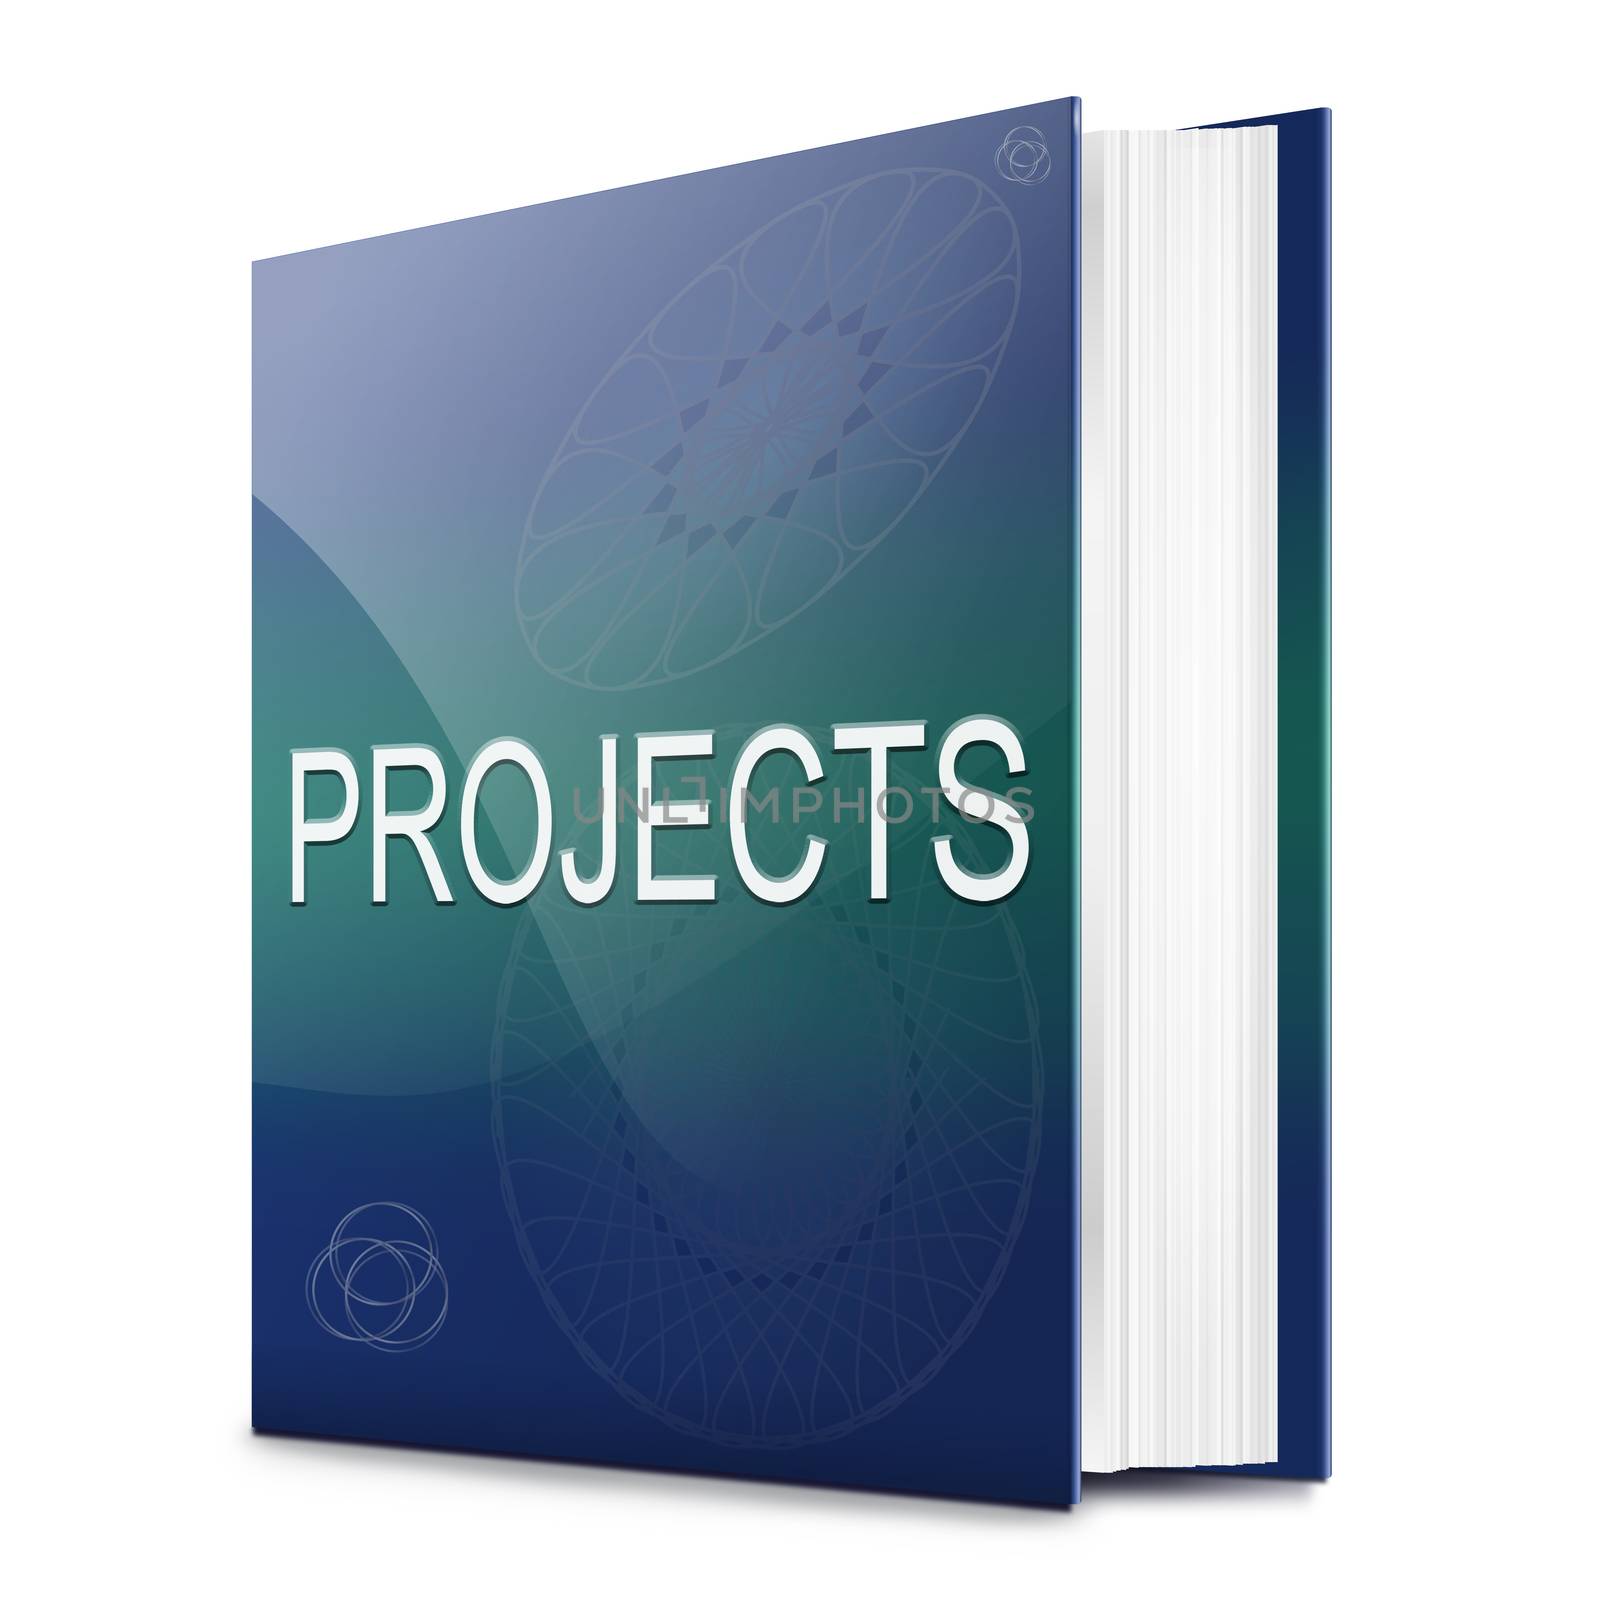 Project book concept. by 72soul